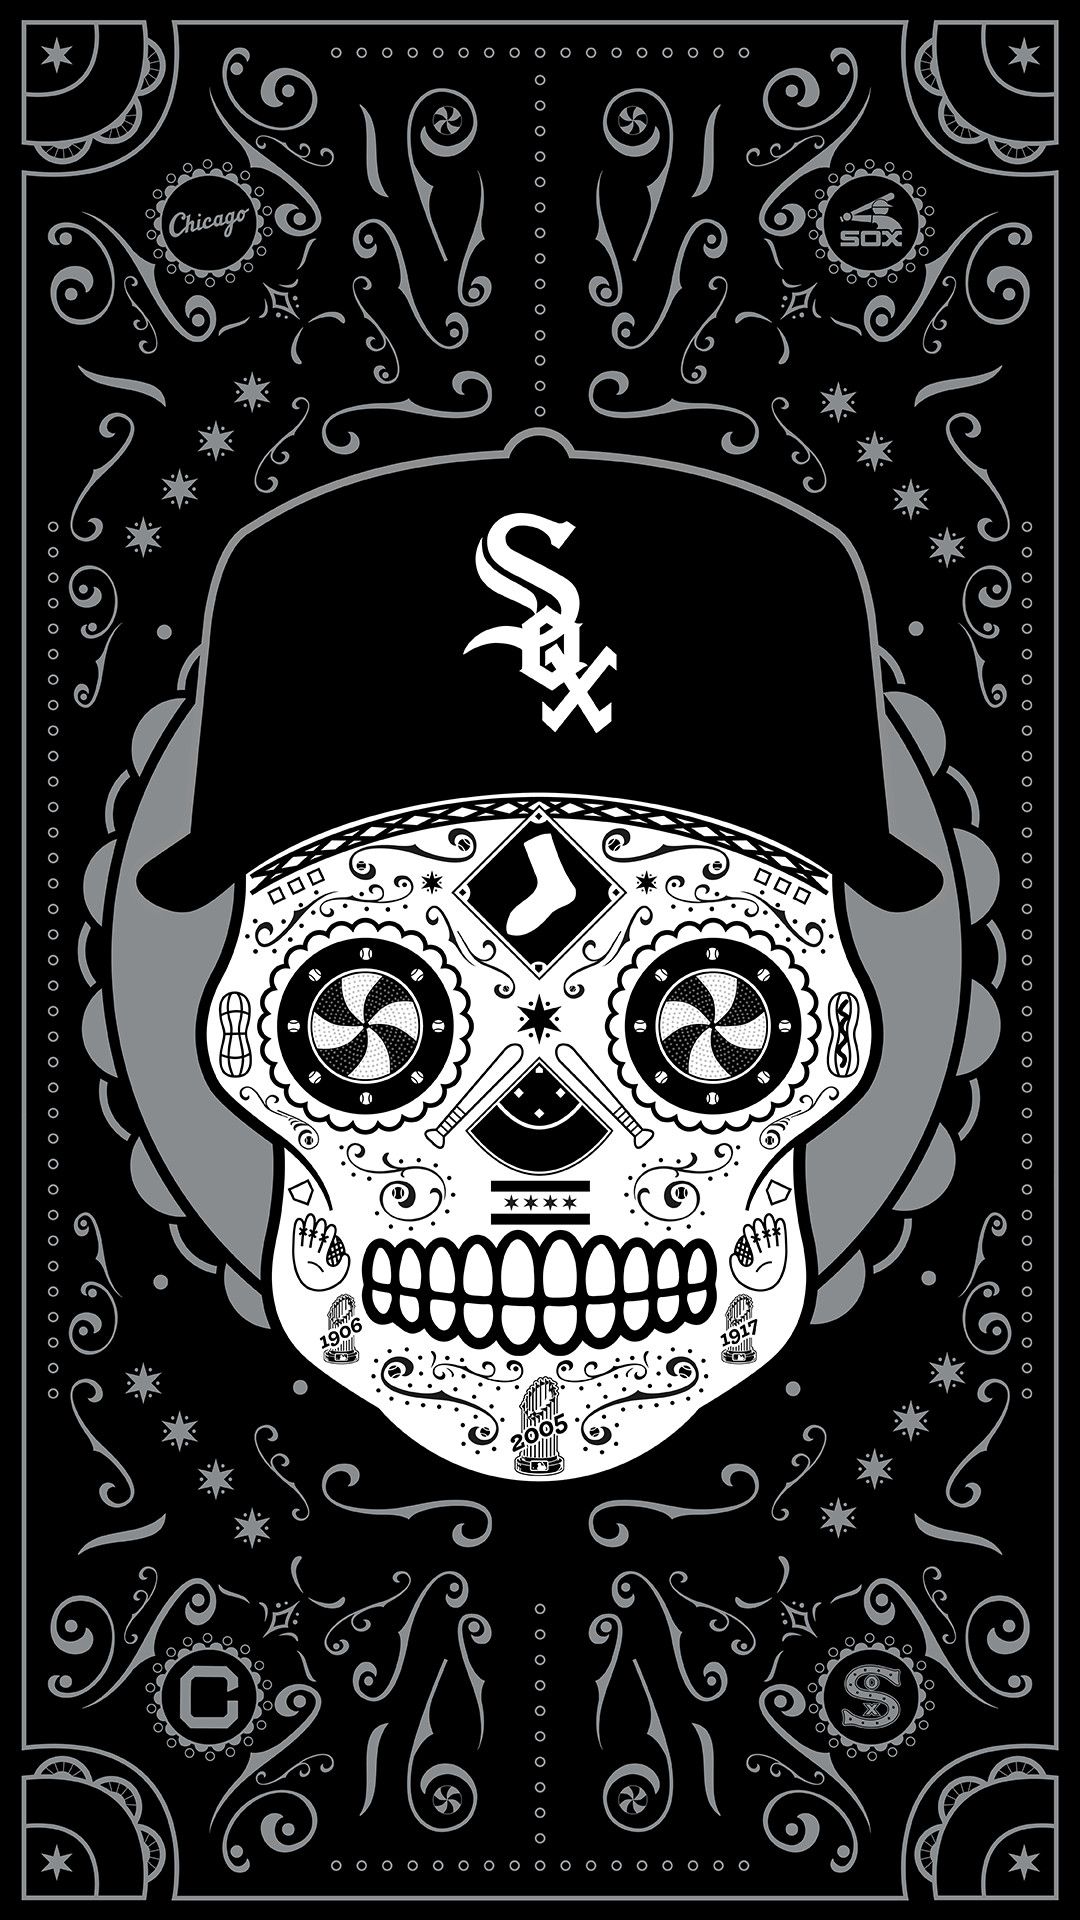 Chicago White Sox iPhone Wallpaper Top